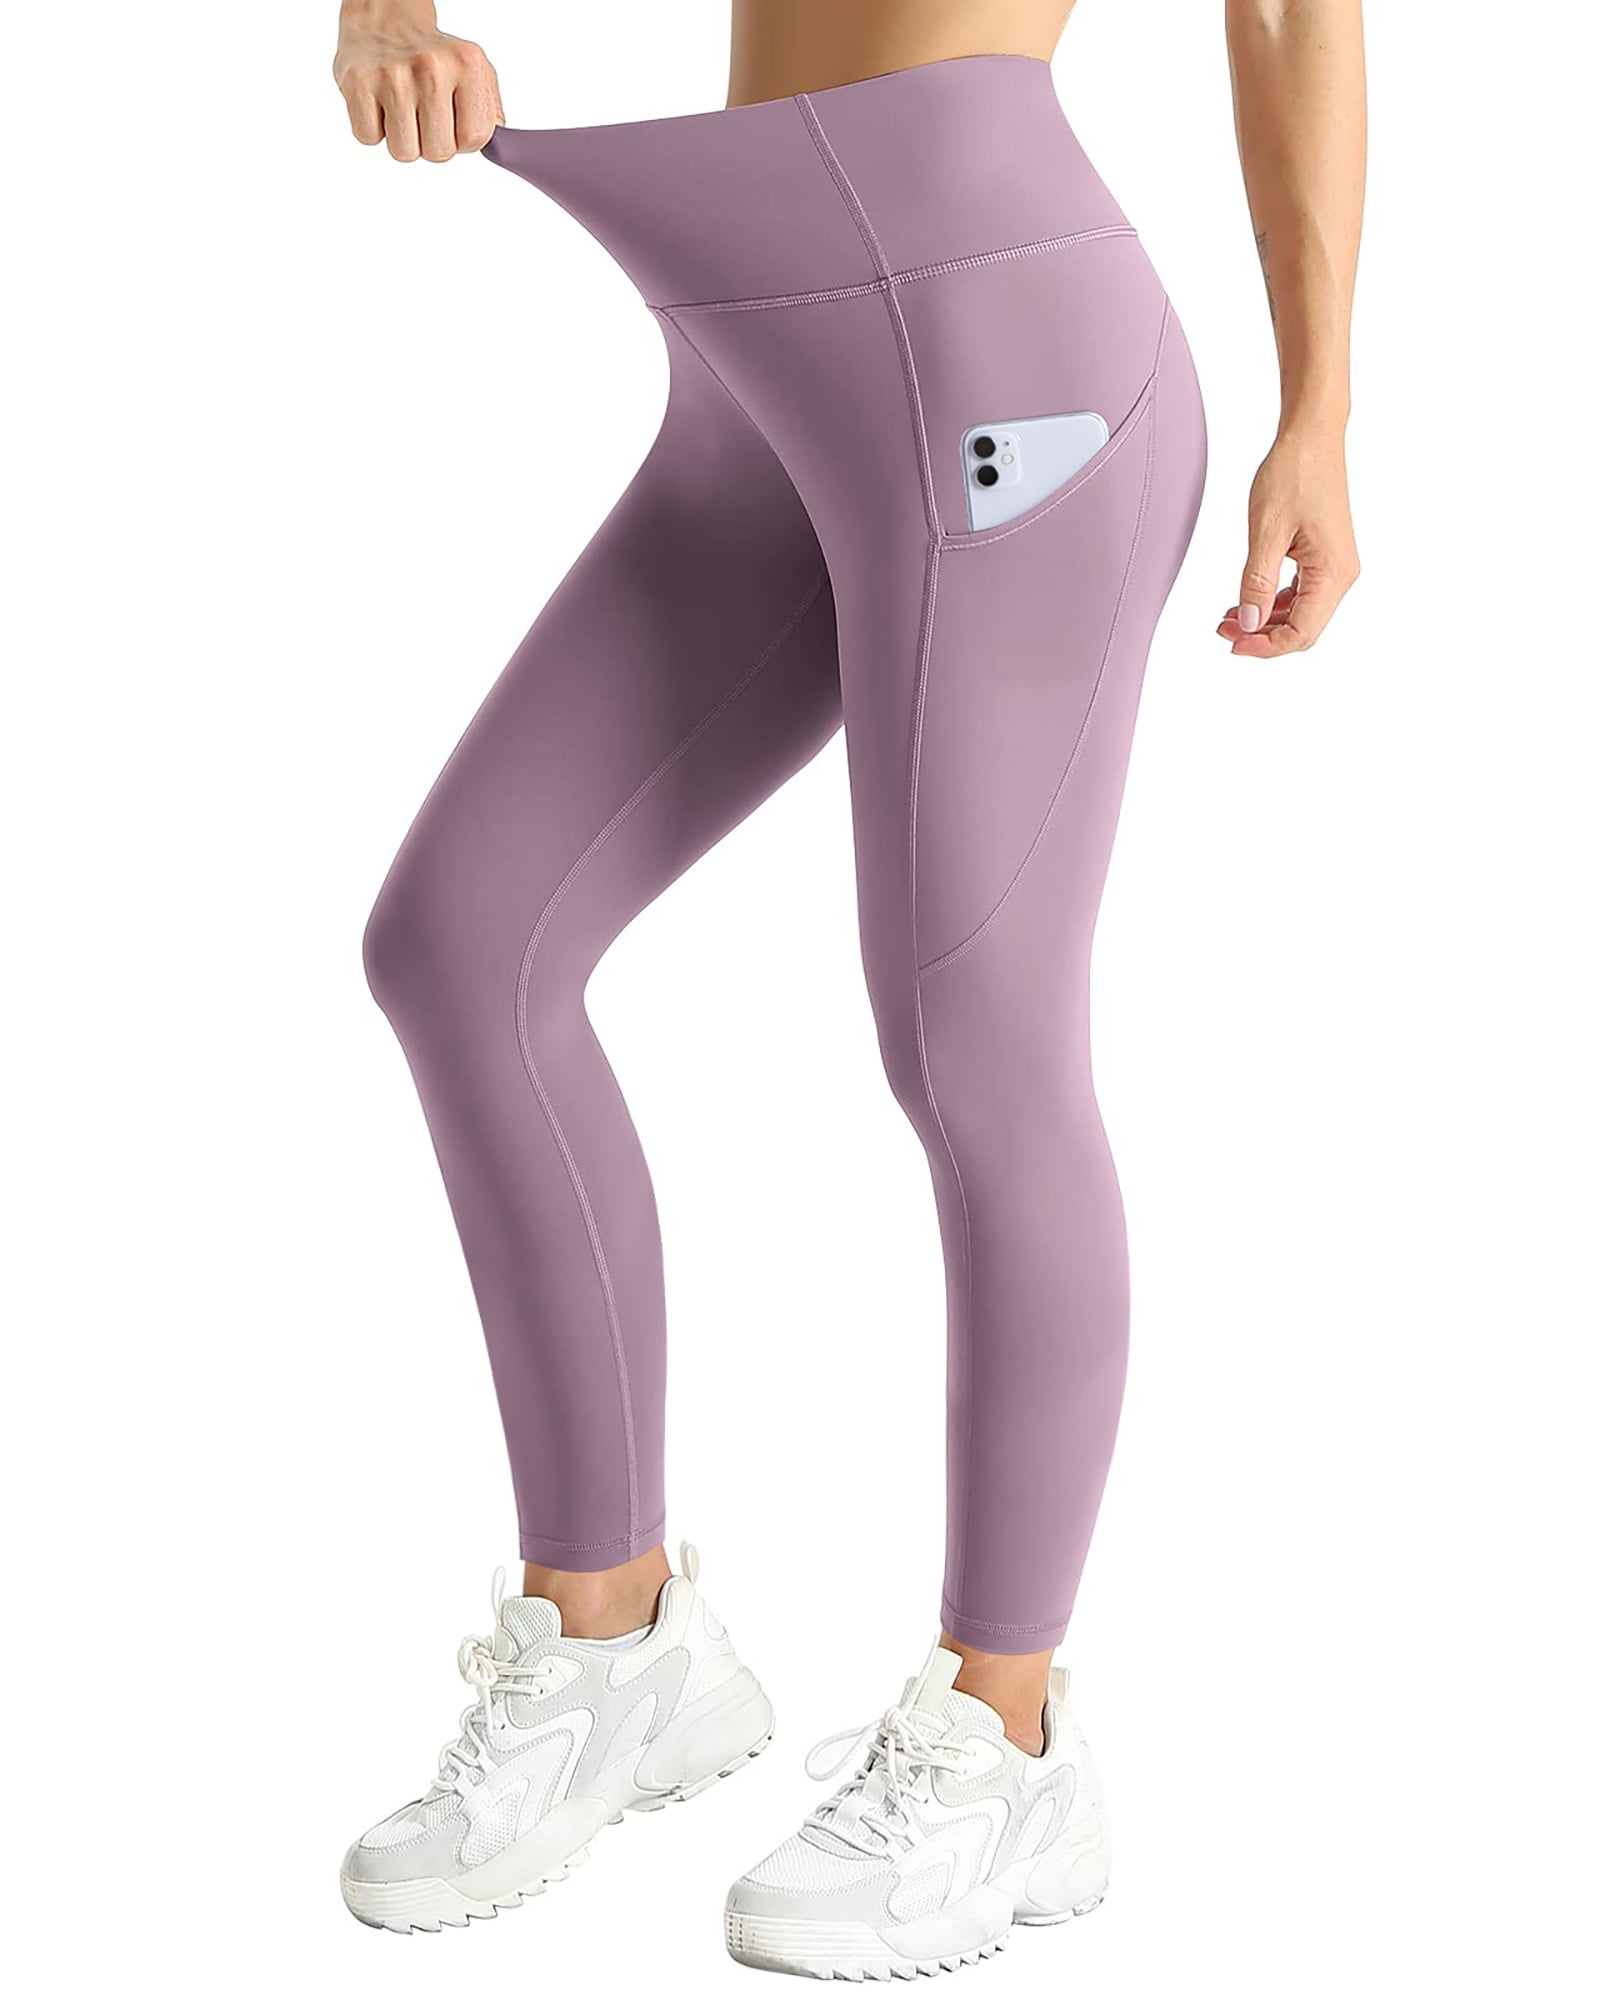 UUE 25Inseam Purple Soft leggings with 3 Pockets for women and